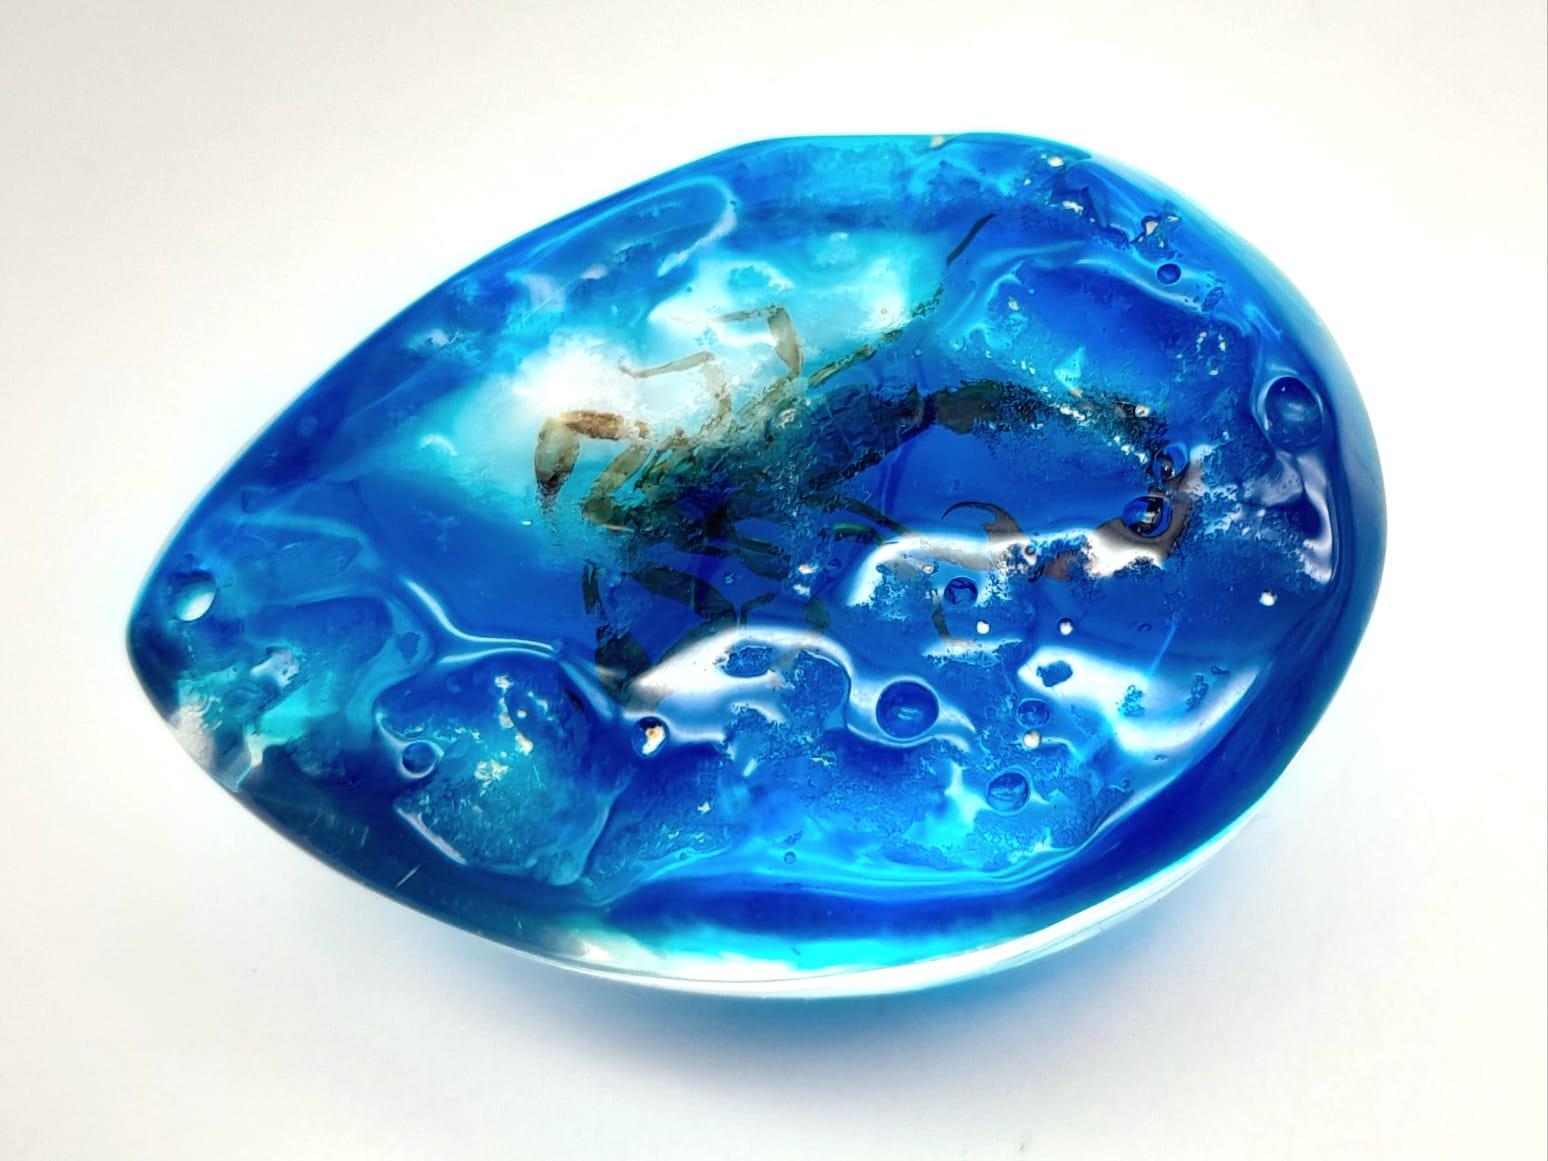 A Scorpion Trapped in a Blue Resin Heaven - Pendant or paperweight. 6cm - Image 2 of 3